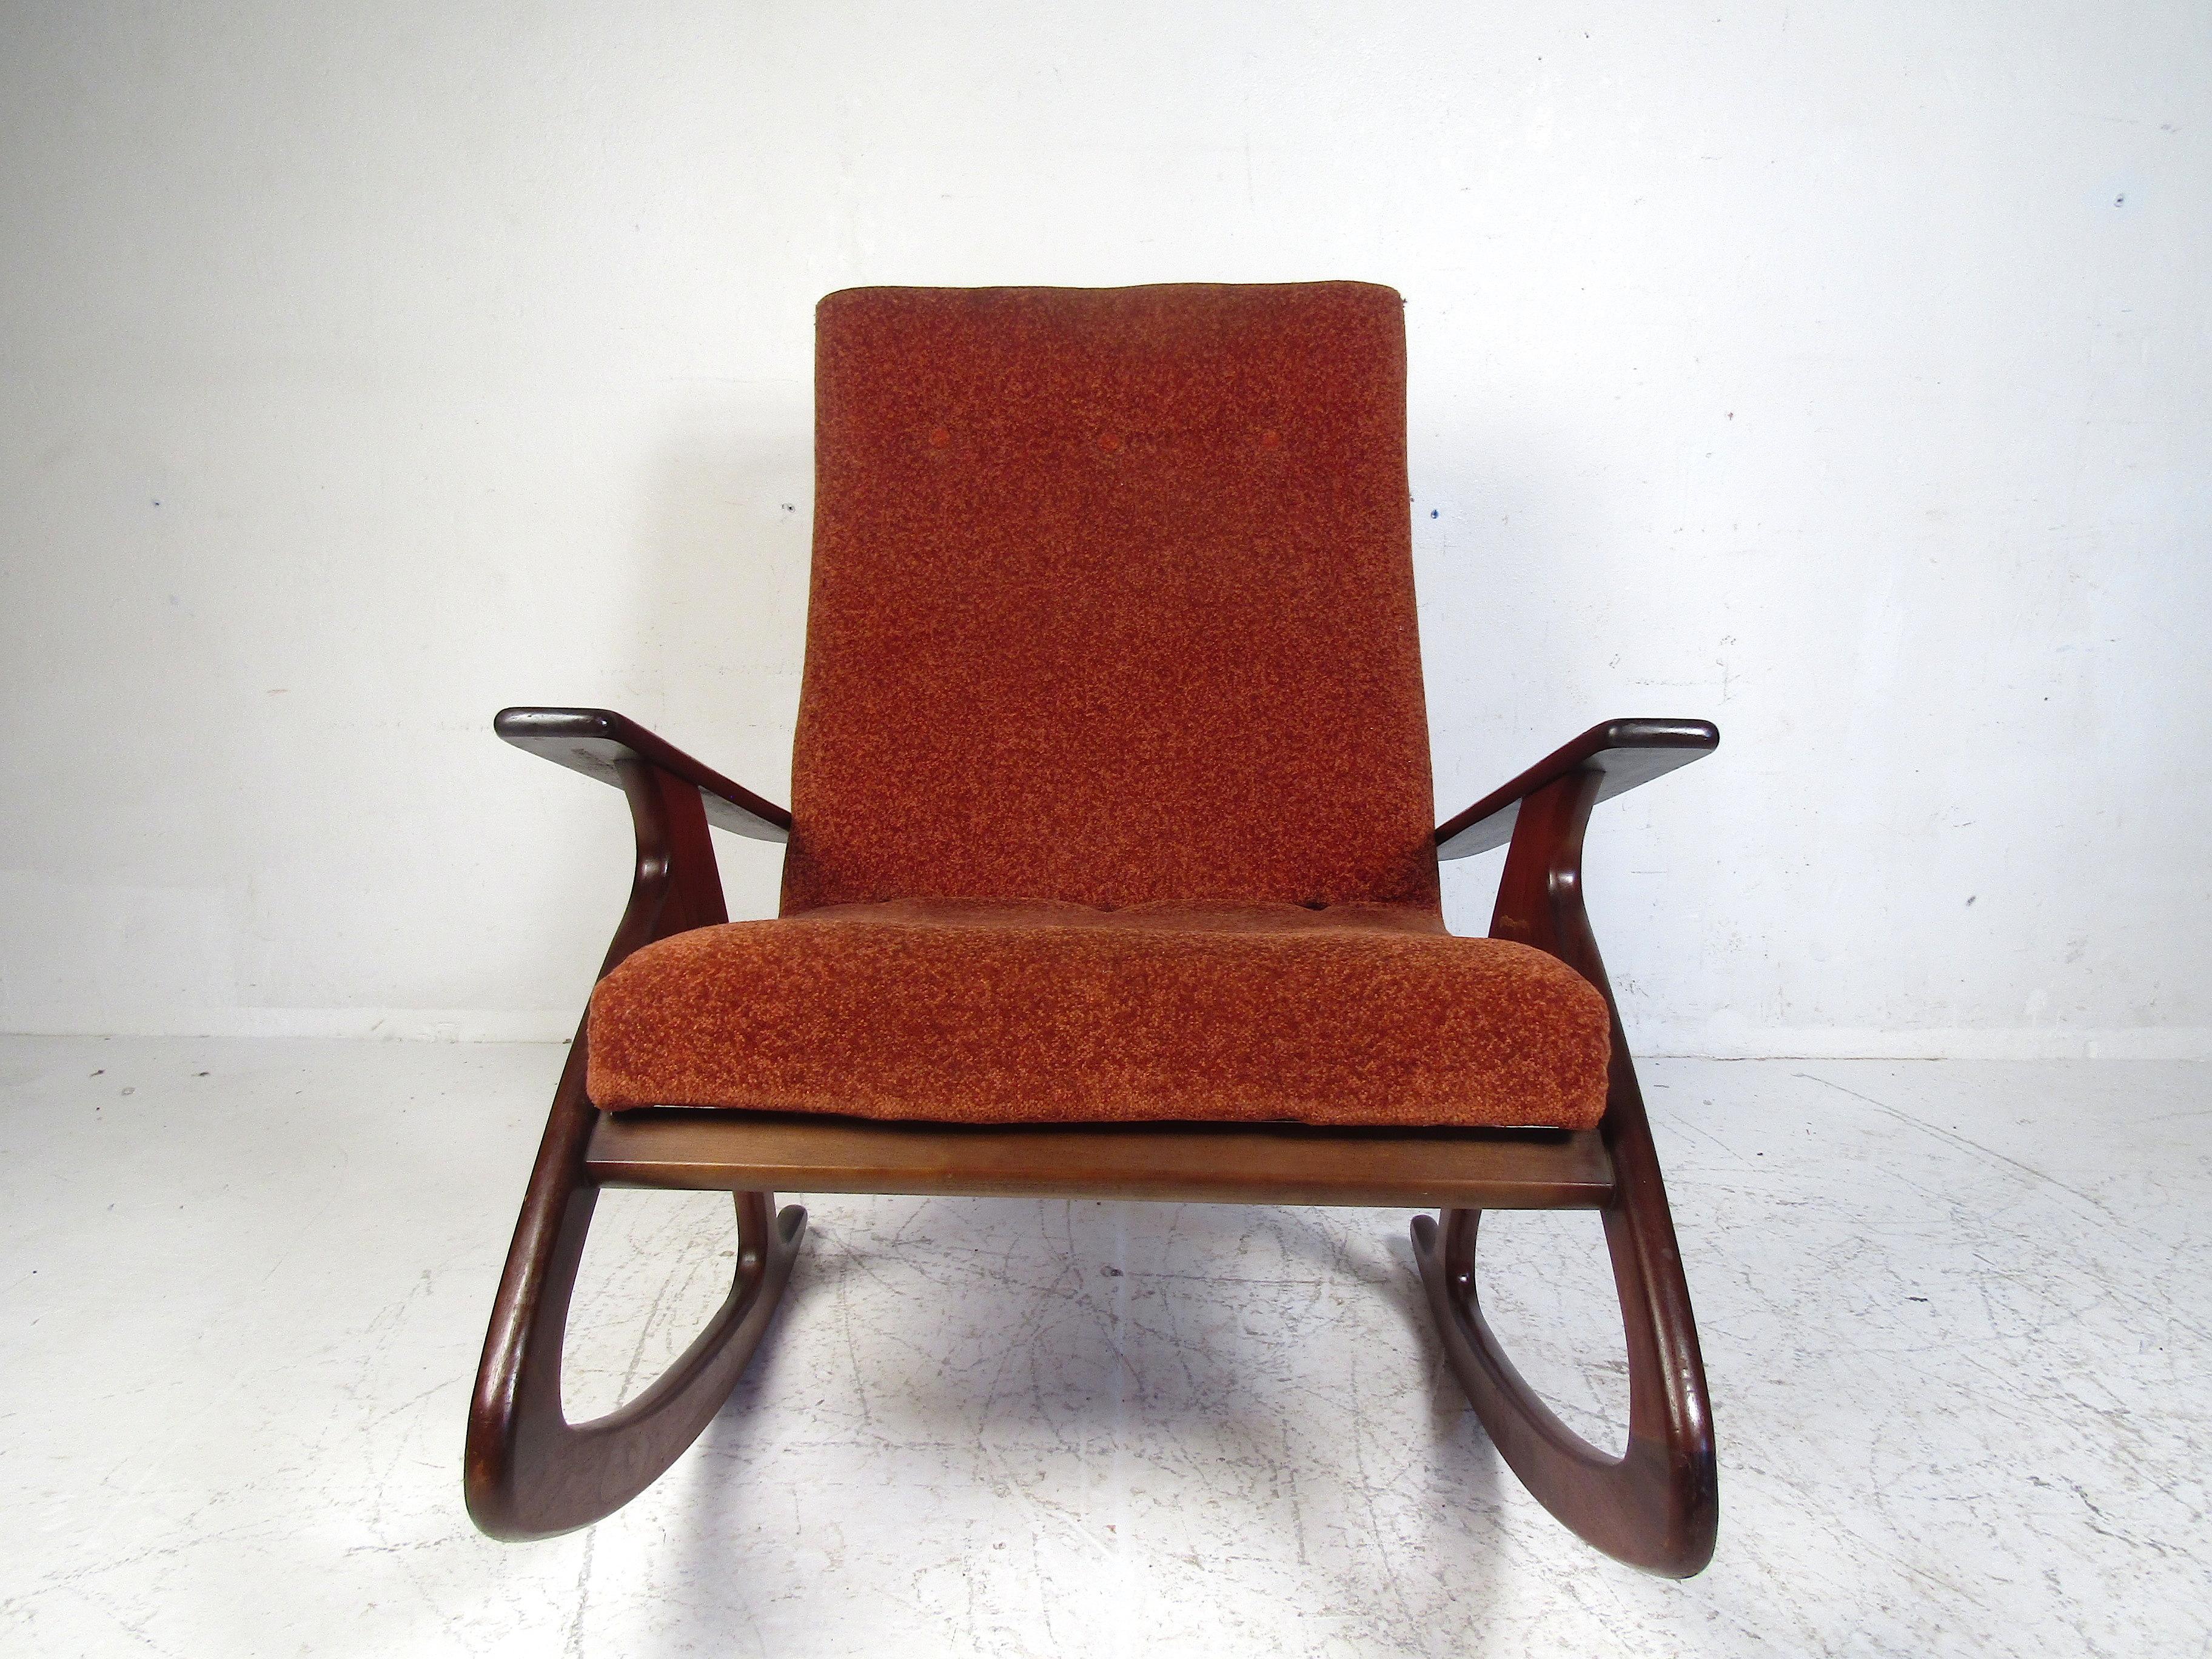 Stylish midcentury oversized rocking chair. Sturdy wooden frame with a smooth rocking action. Spacious seat and wide armrests. Covered in a vintage shag upholstery. Comfortable rocker sure to mesh with any modern interior. Please confirm item